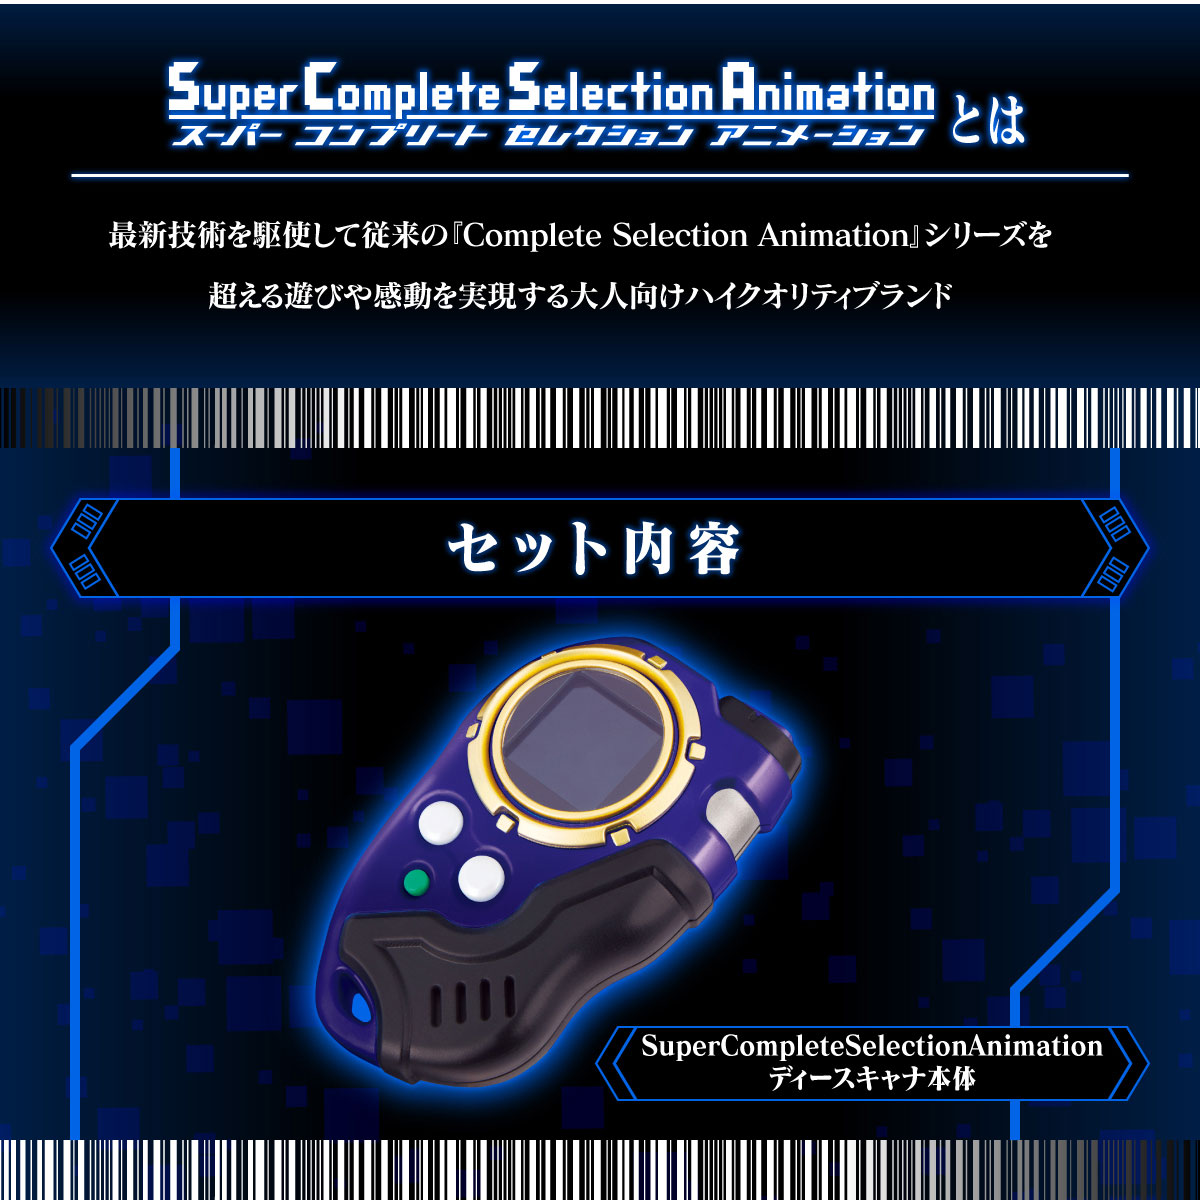 SuperCompleteSelectionAnimation ディースキャナver.ULTIMATE BLUE 